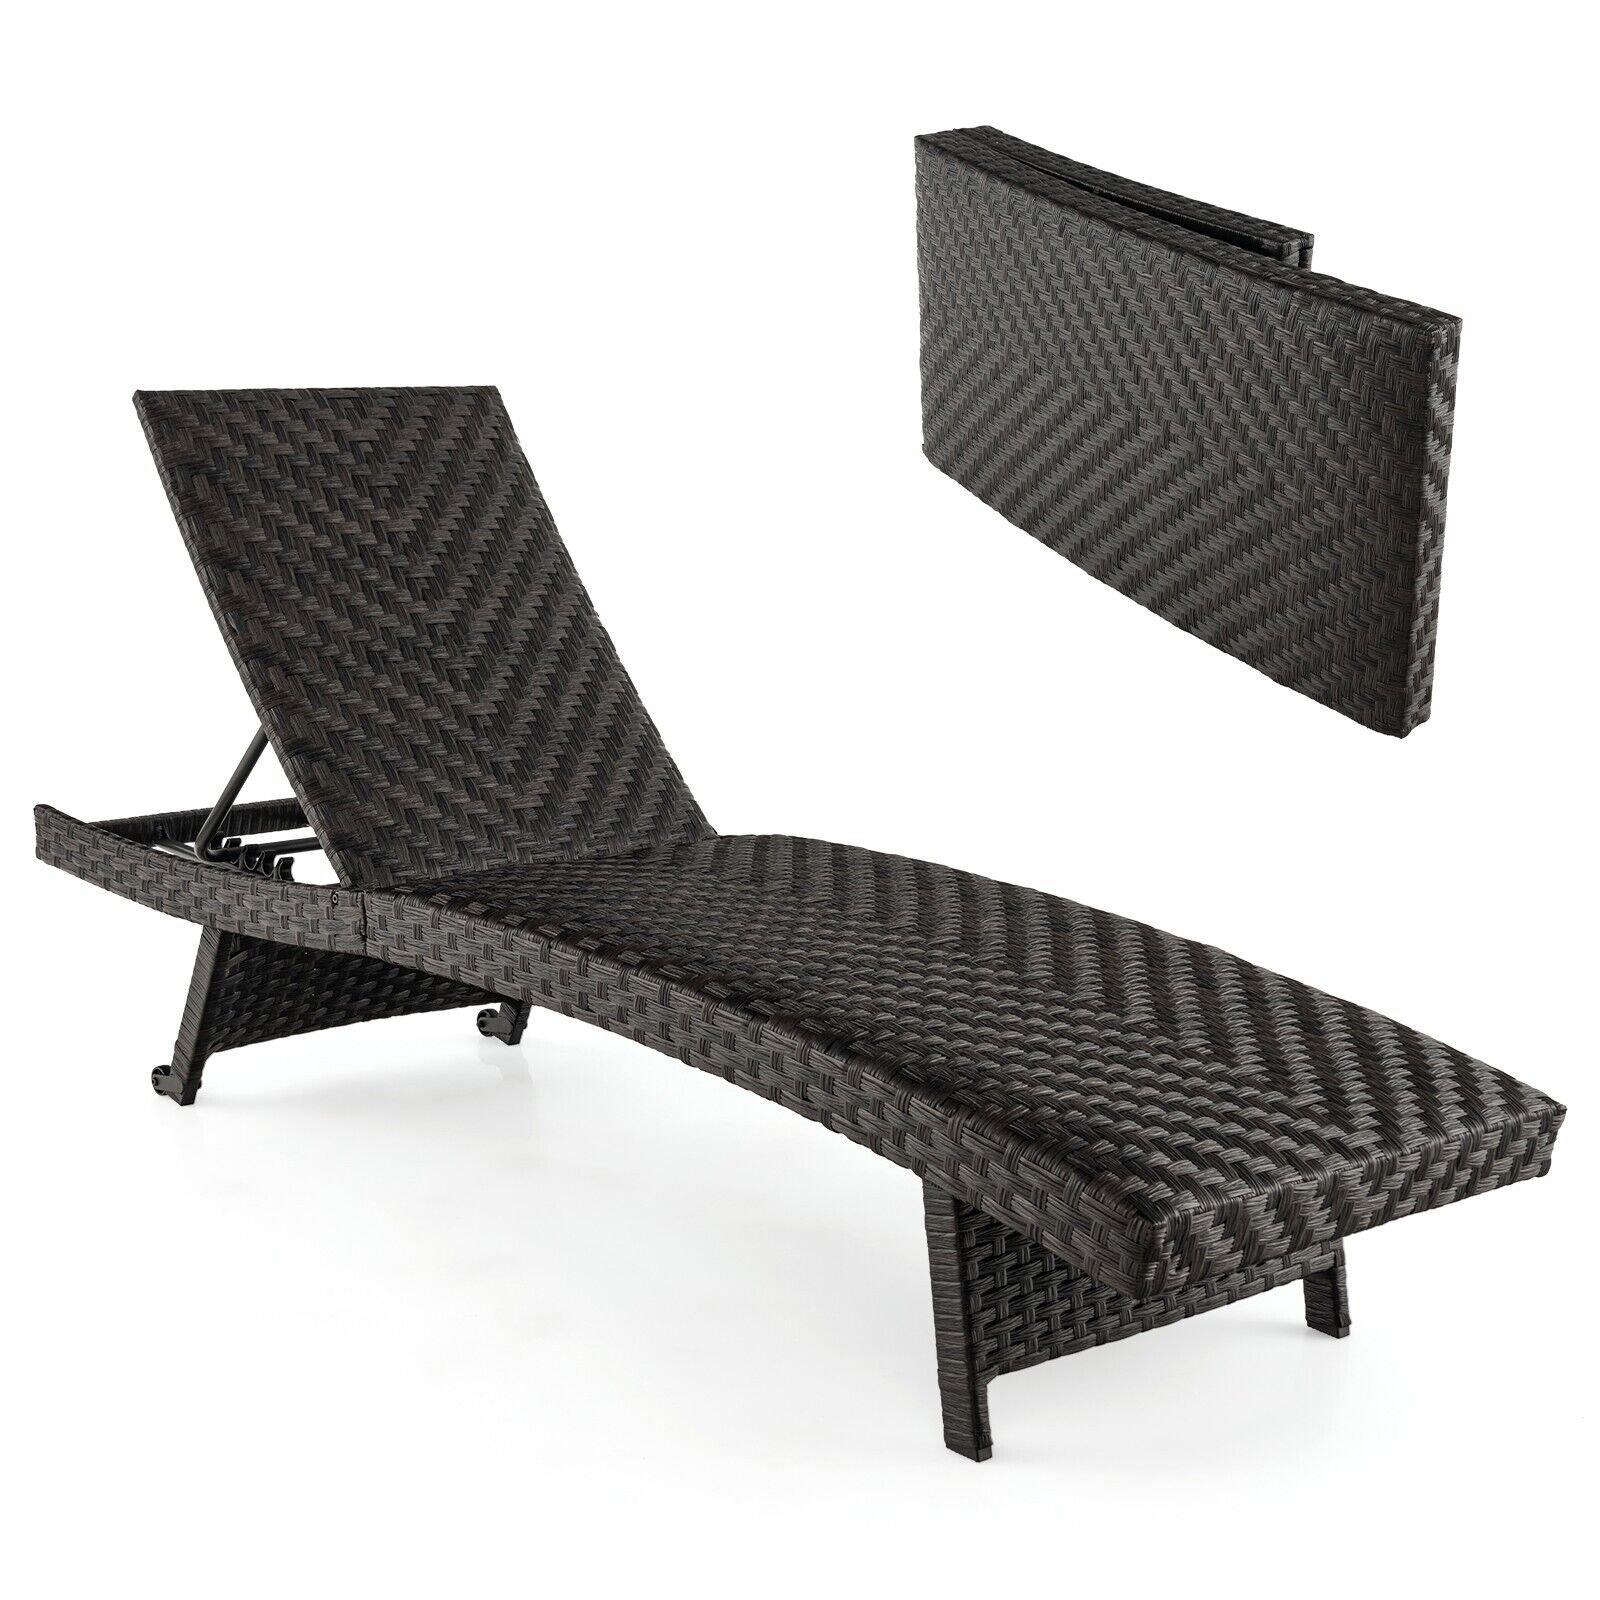 Folding Patio Chaise Lounge Padded Rattan Lounge Chair w/5-Level Adjustable Back